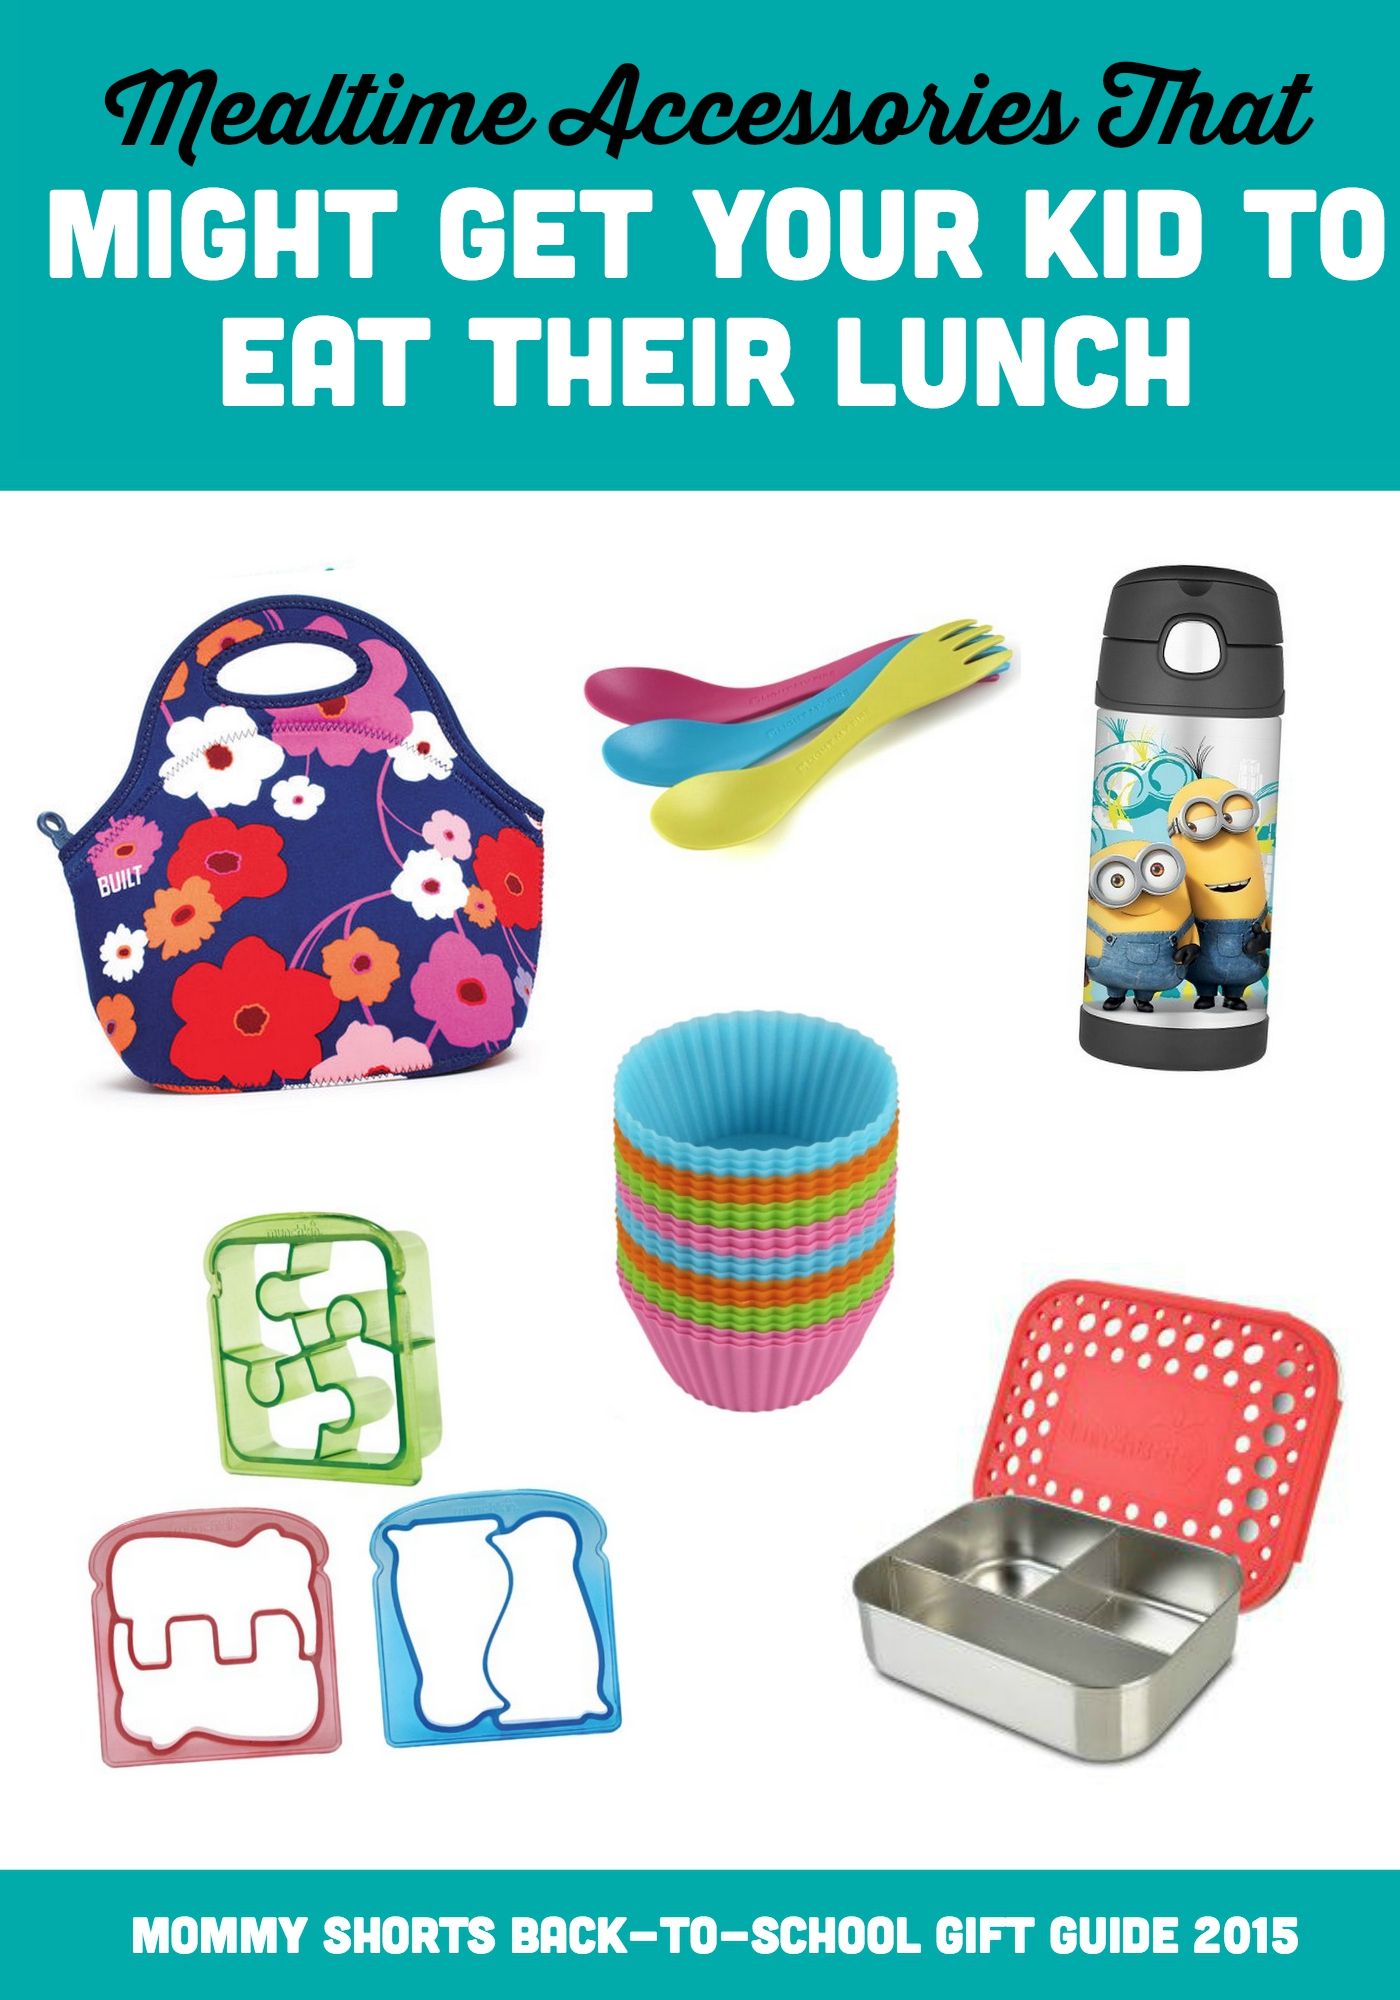 Mealtime accessories that might get your kid to eat their lunch